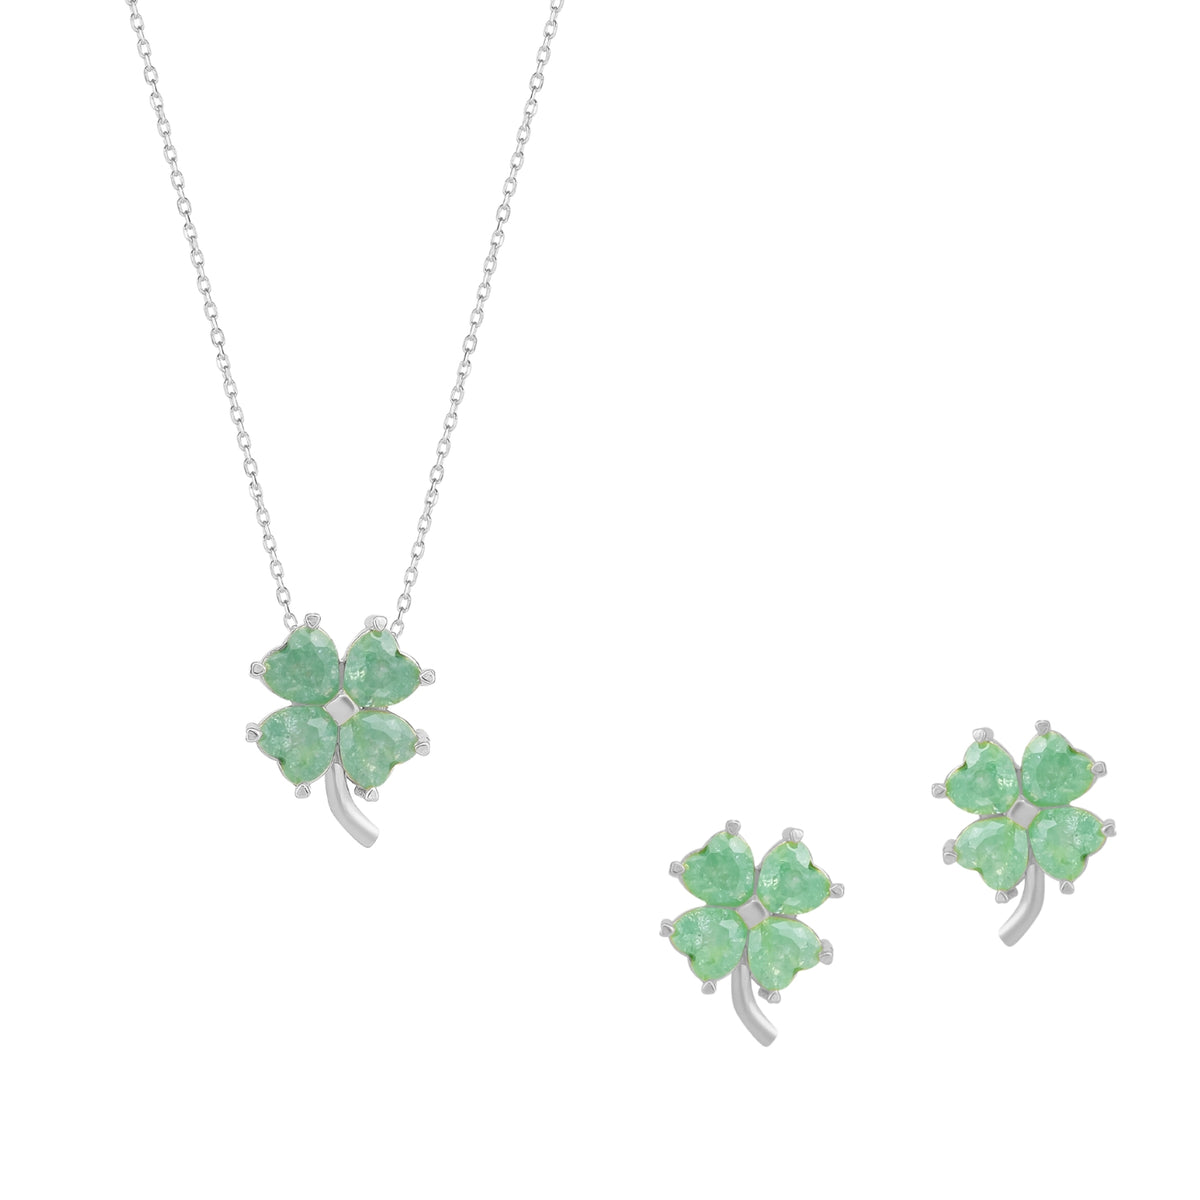 Four Leaves Clover Sterling Silver Earring and Necklace Set in Green